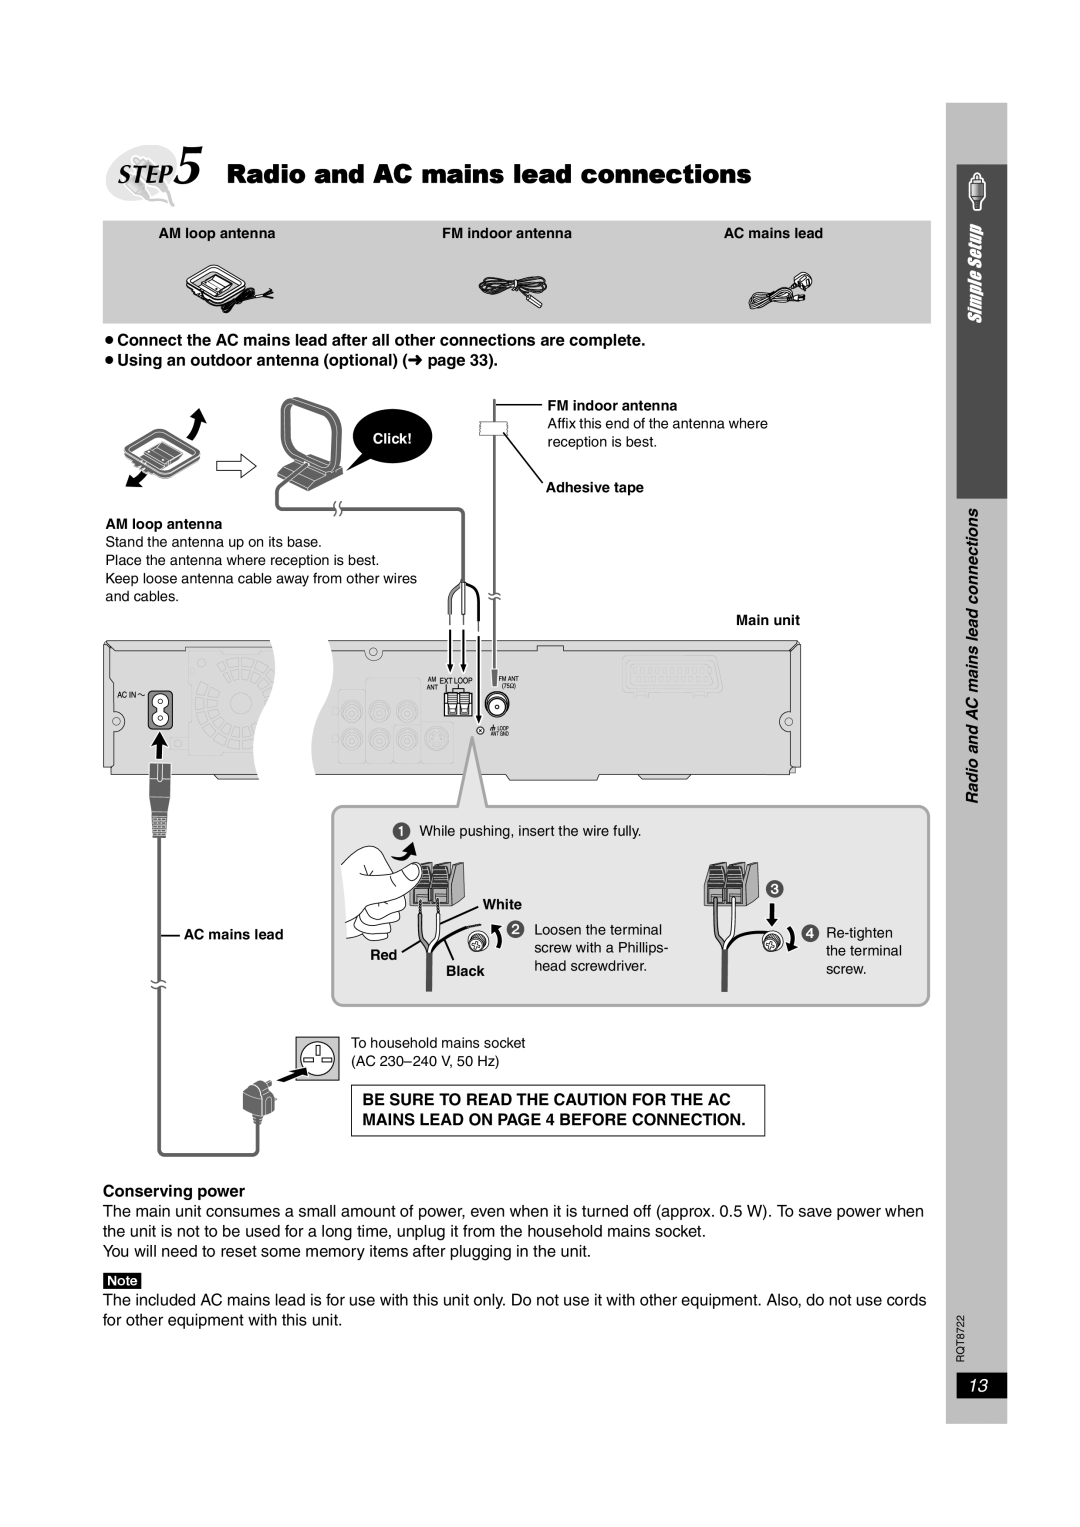 Panasonic SC-HT990, SC-HT540 Radio and AC mains lead connections, Simple Setup, ≥Using an outdoor antenna optional page 